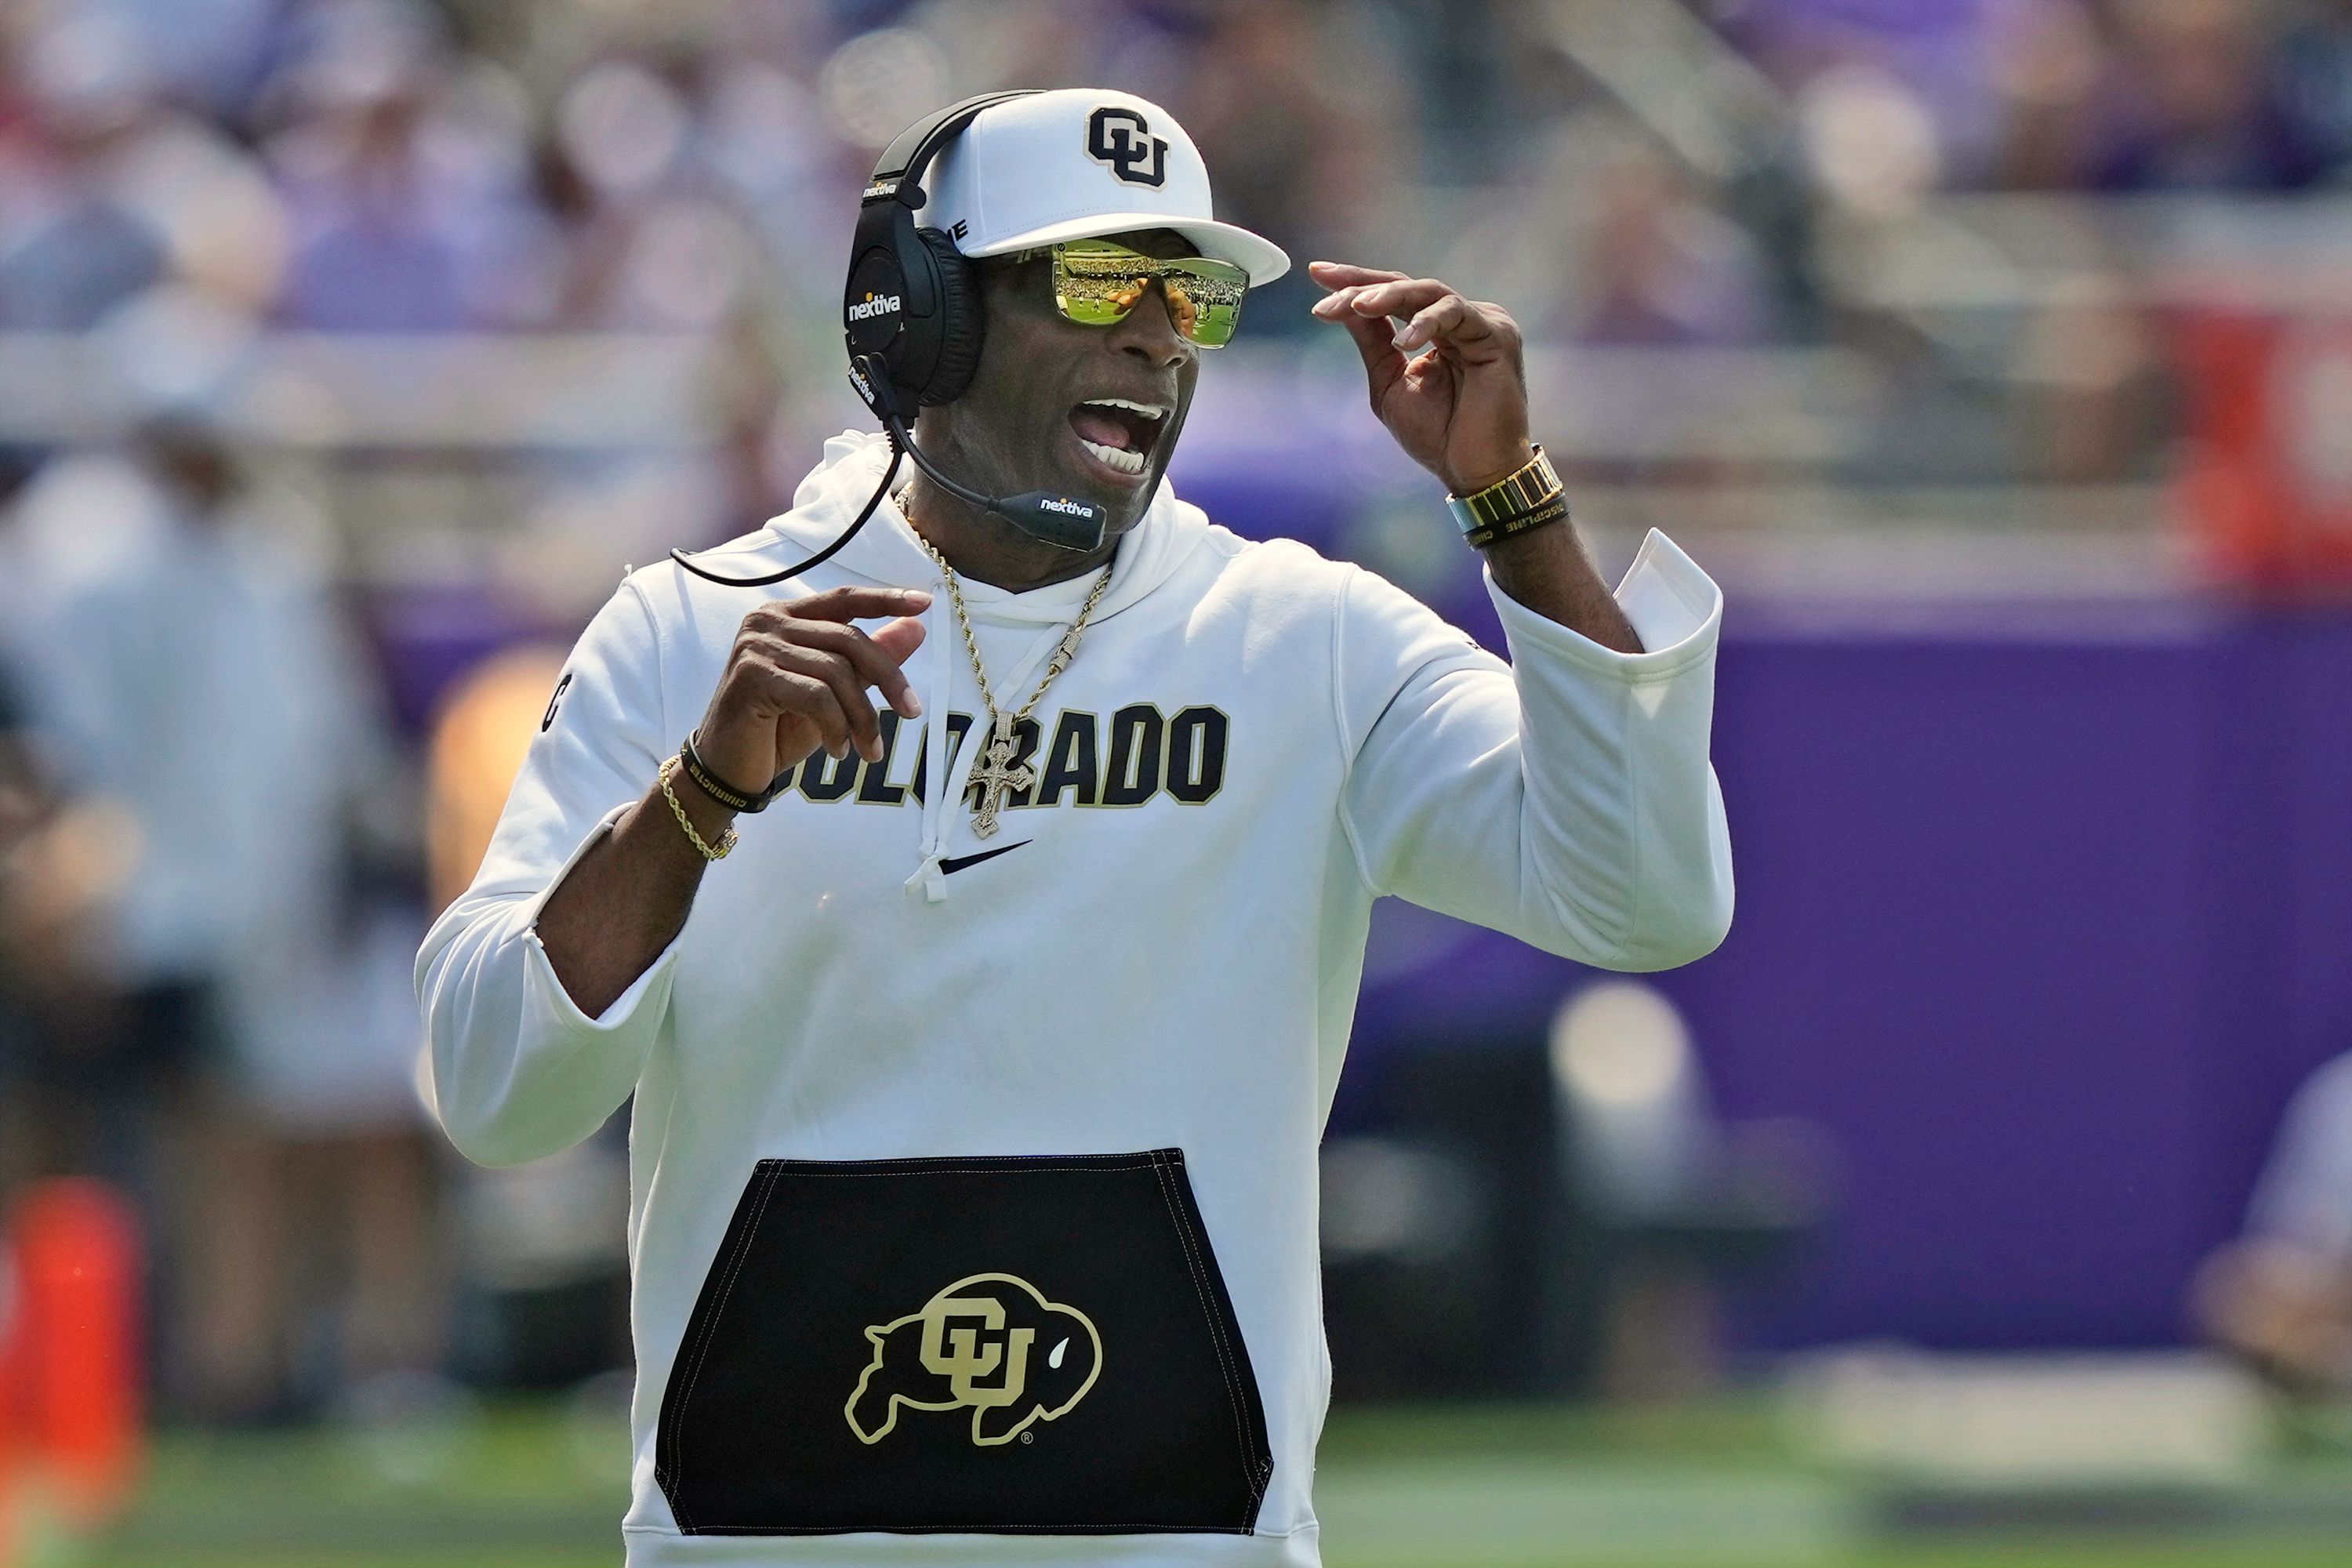 Deion Sanders and Colorado upset No. 17 TCU in his FBS coaching